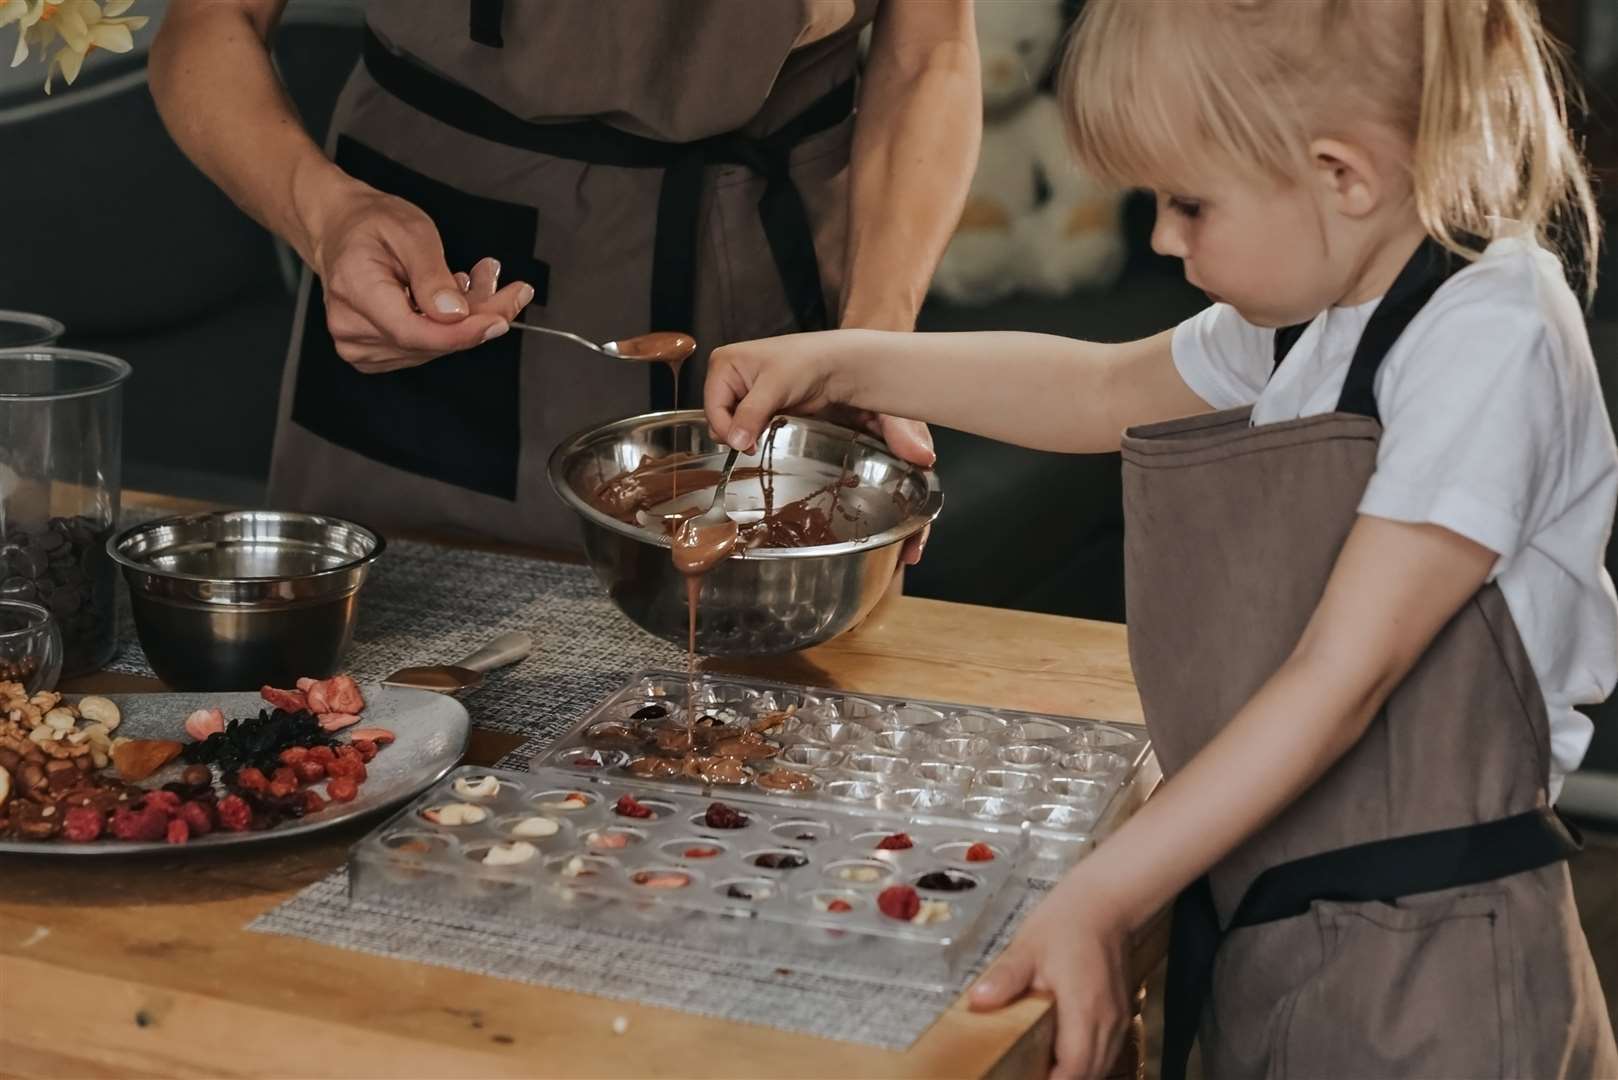 Cook up some tasty chocolate together. Picture: iStock